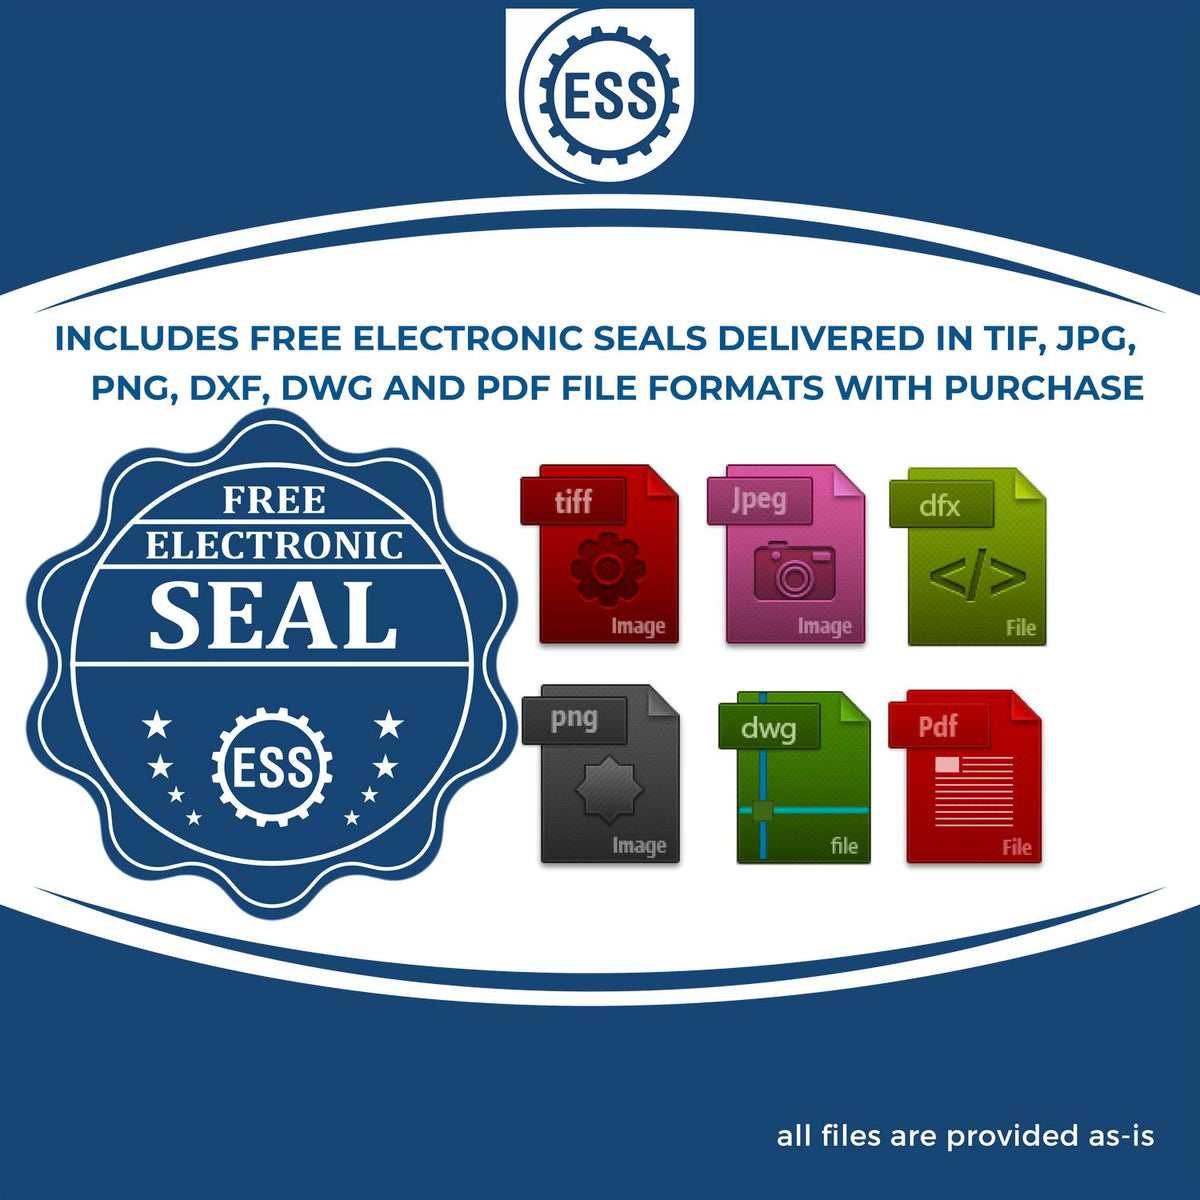 An infographic for the free electronic seal for the Soft Utah Professional Engineer Seal illustrating the different file type icons such as DXF, DWG, TIF, JPG and PNG.